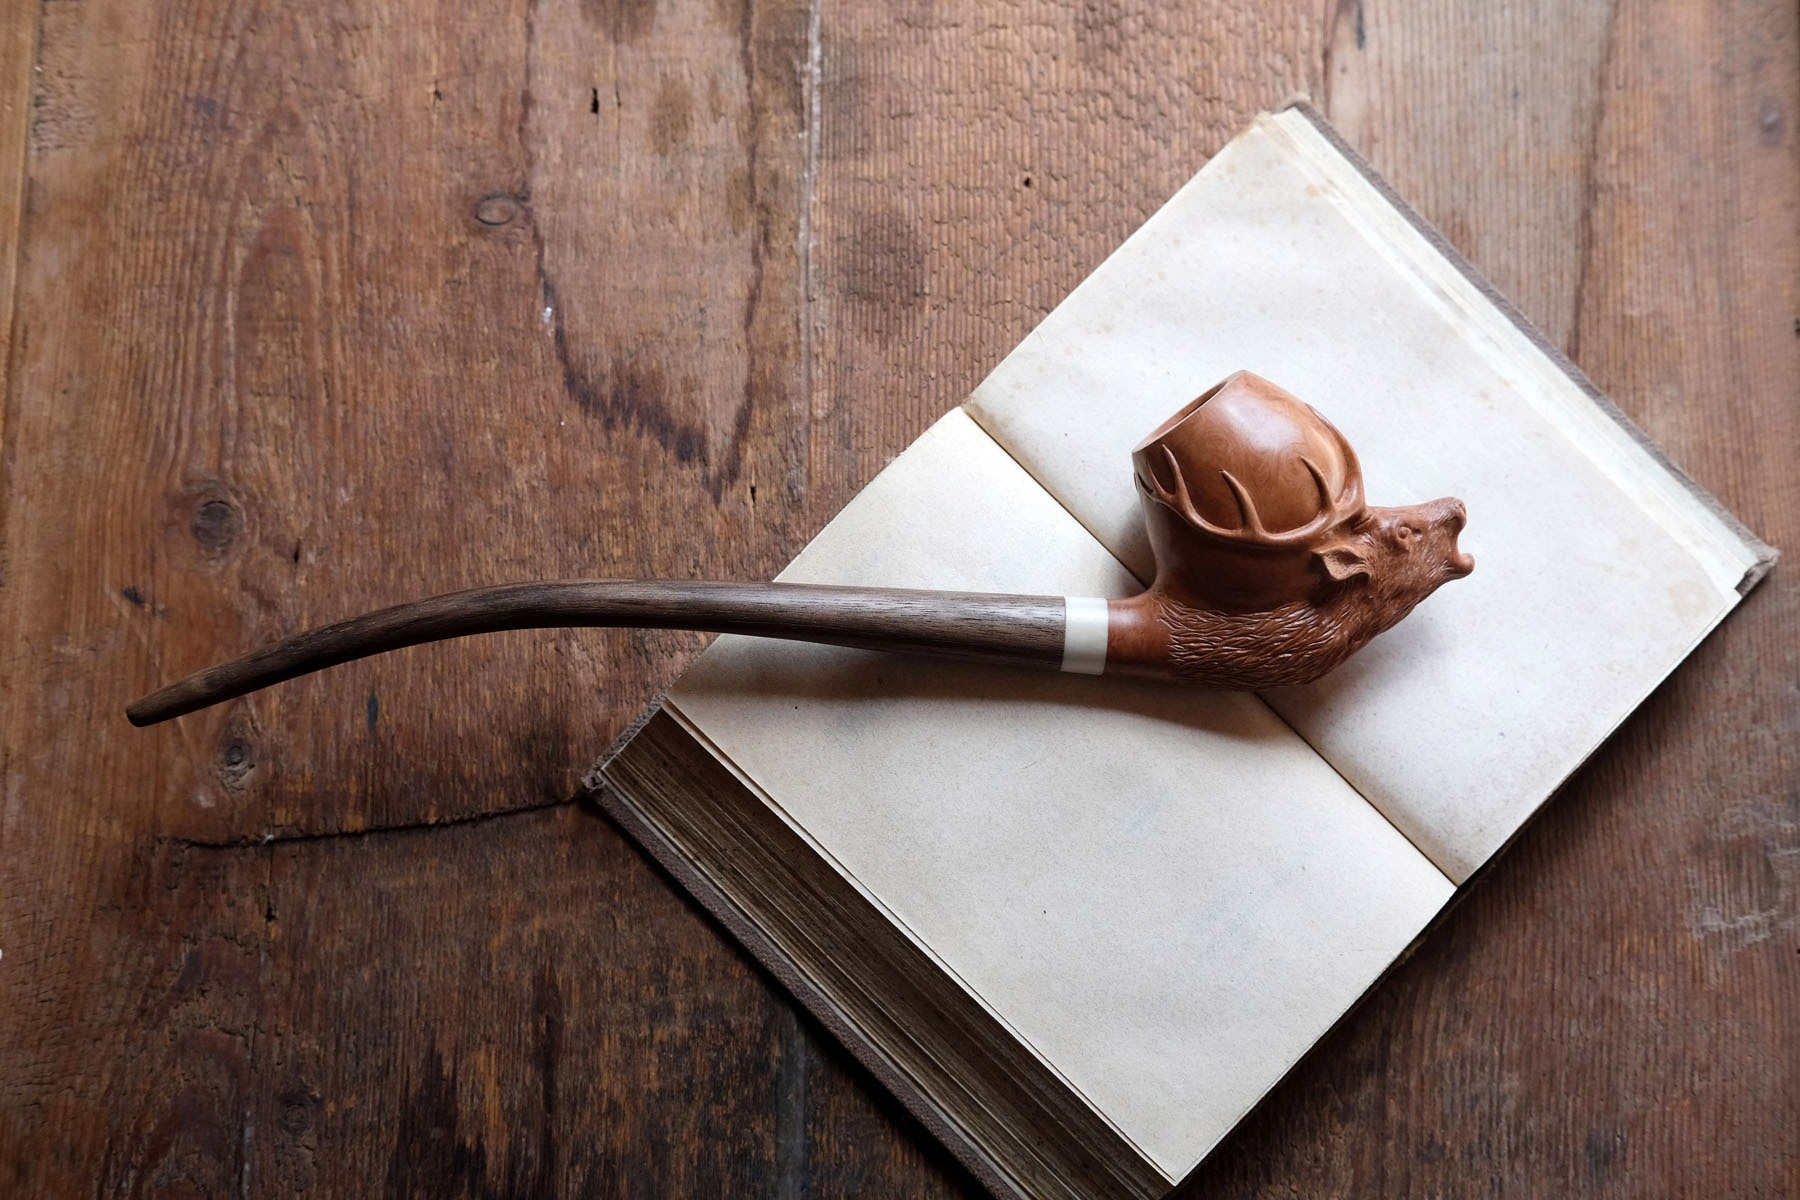 Artistic Tobacco Pipes by Arcangelo Ambrosi | Daily design inspiration ...